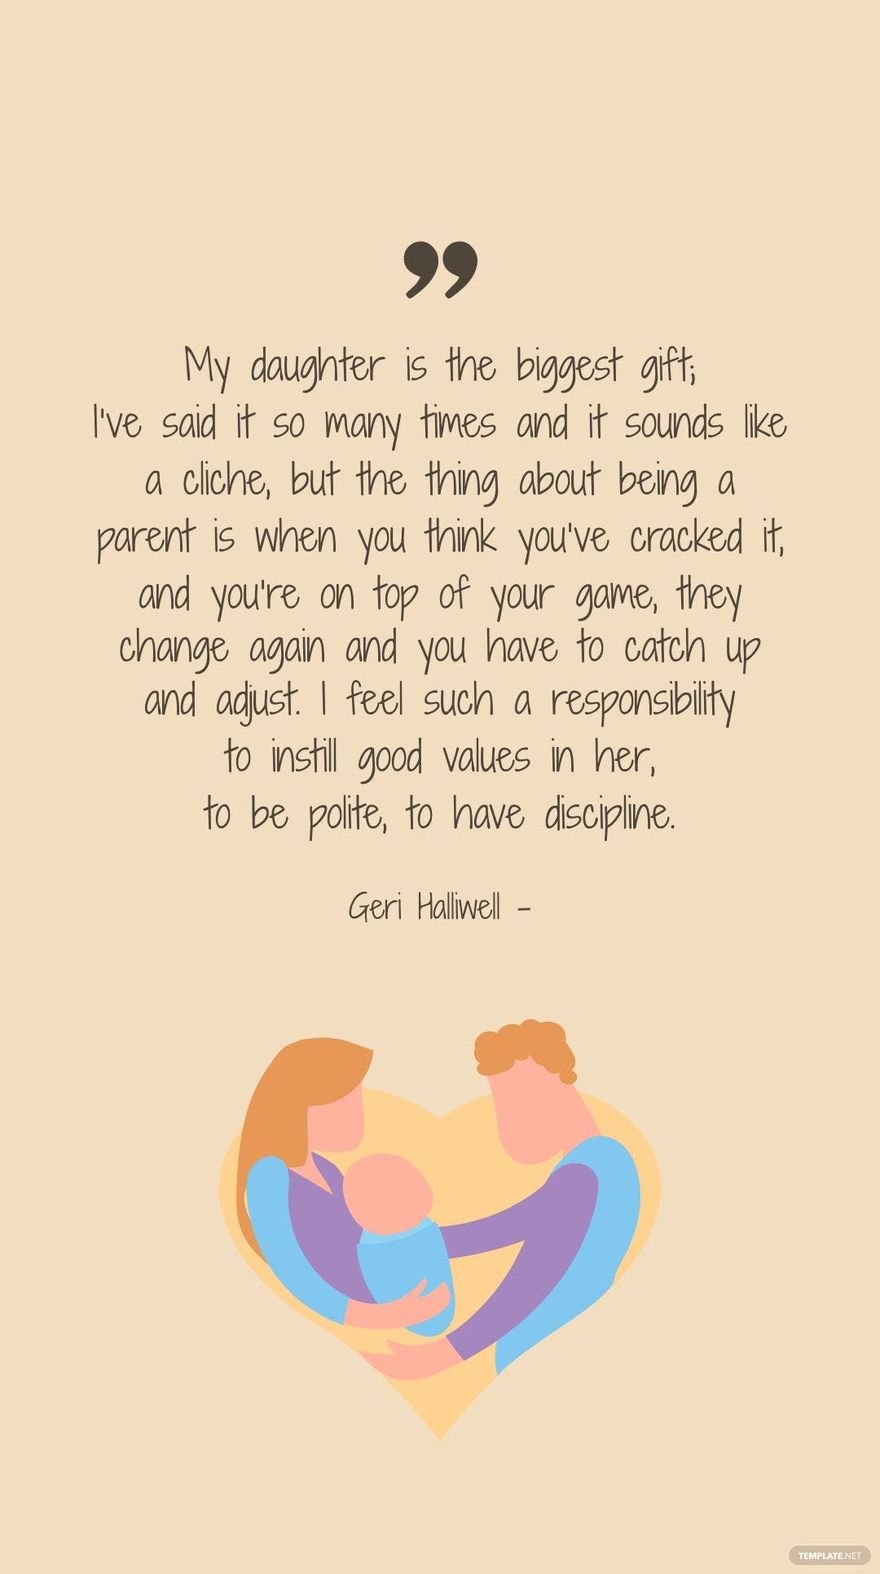 GERI HALLIWELL - My daughter is the biggest gift; I’ve said it so many times and it sounds like a cliche, but the thing about being a parent is when you think you’ve cracked it, and you’re on top of y